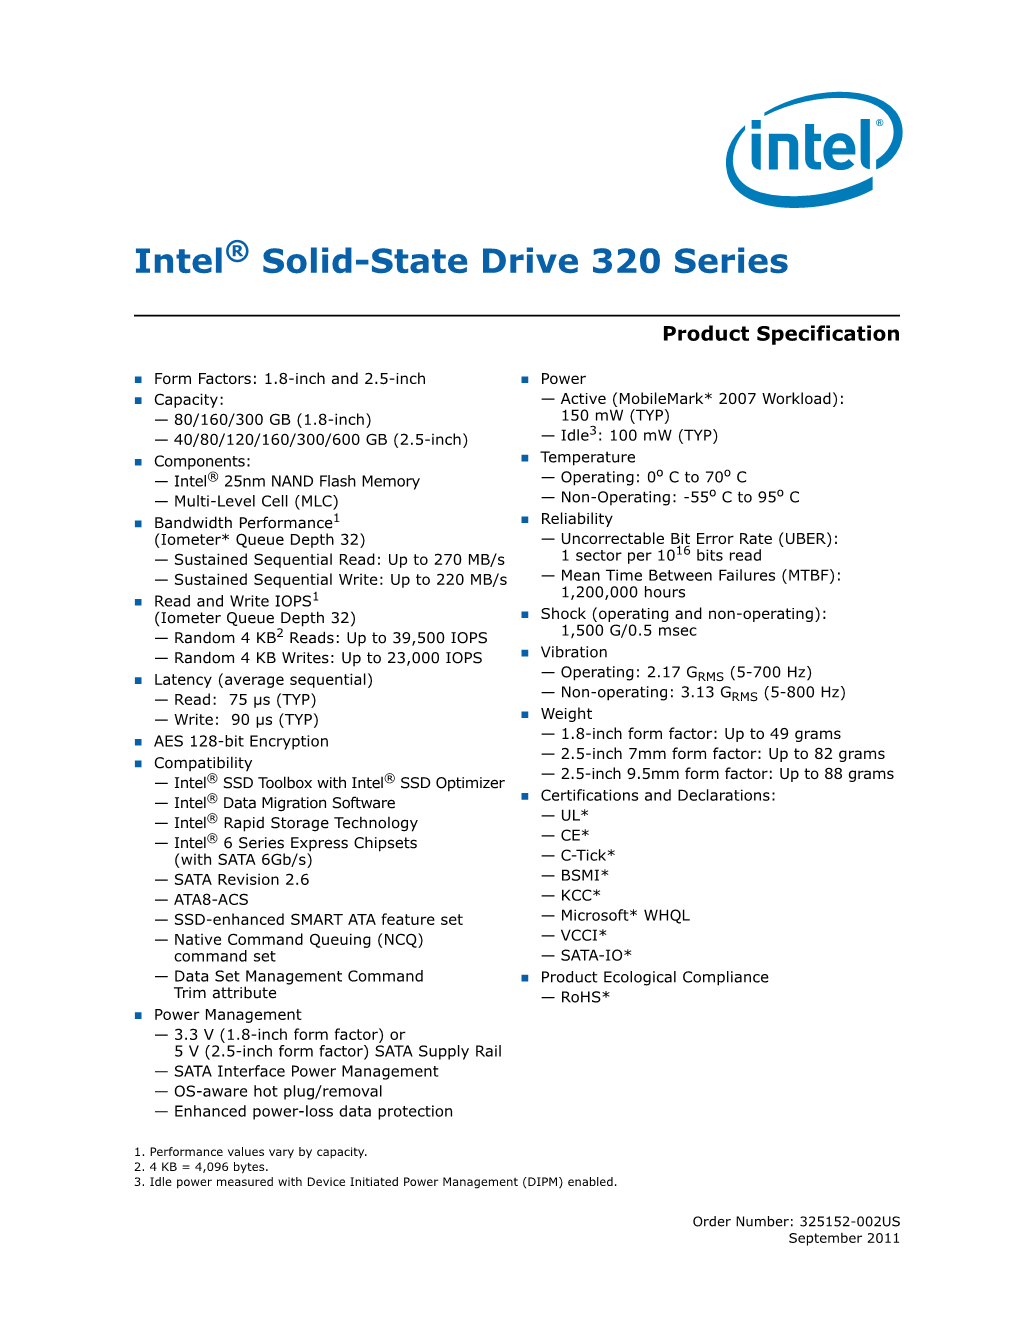 Intel Solid-State Drive 320 Series Product Specification